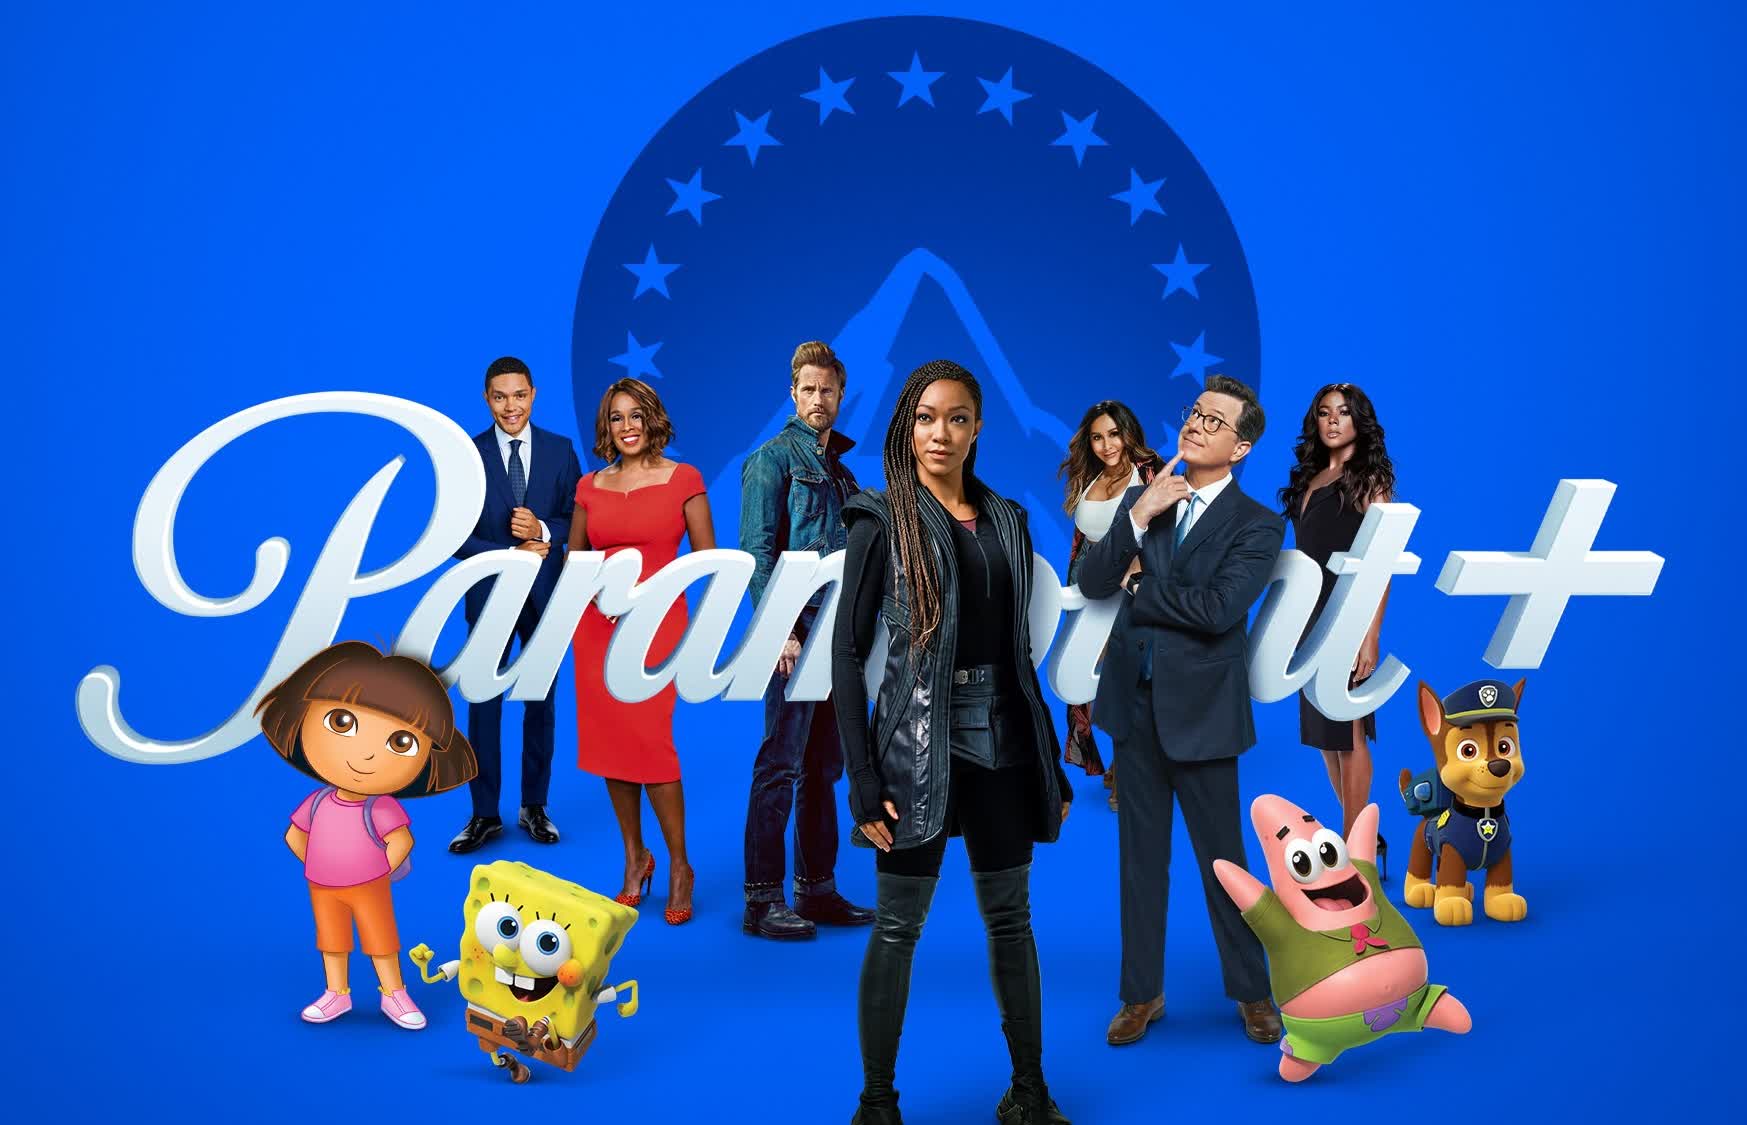 Paramount+ is offering a free one-month subscription for the holidays